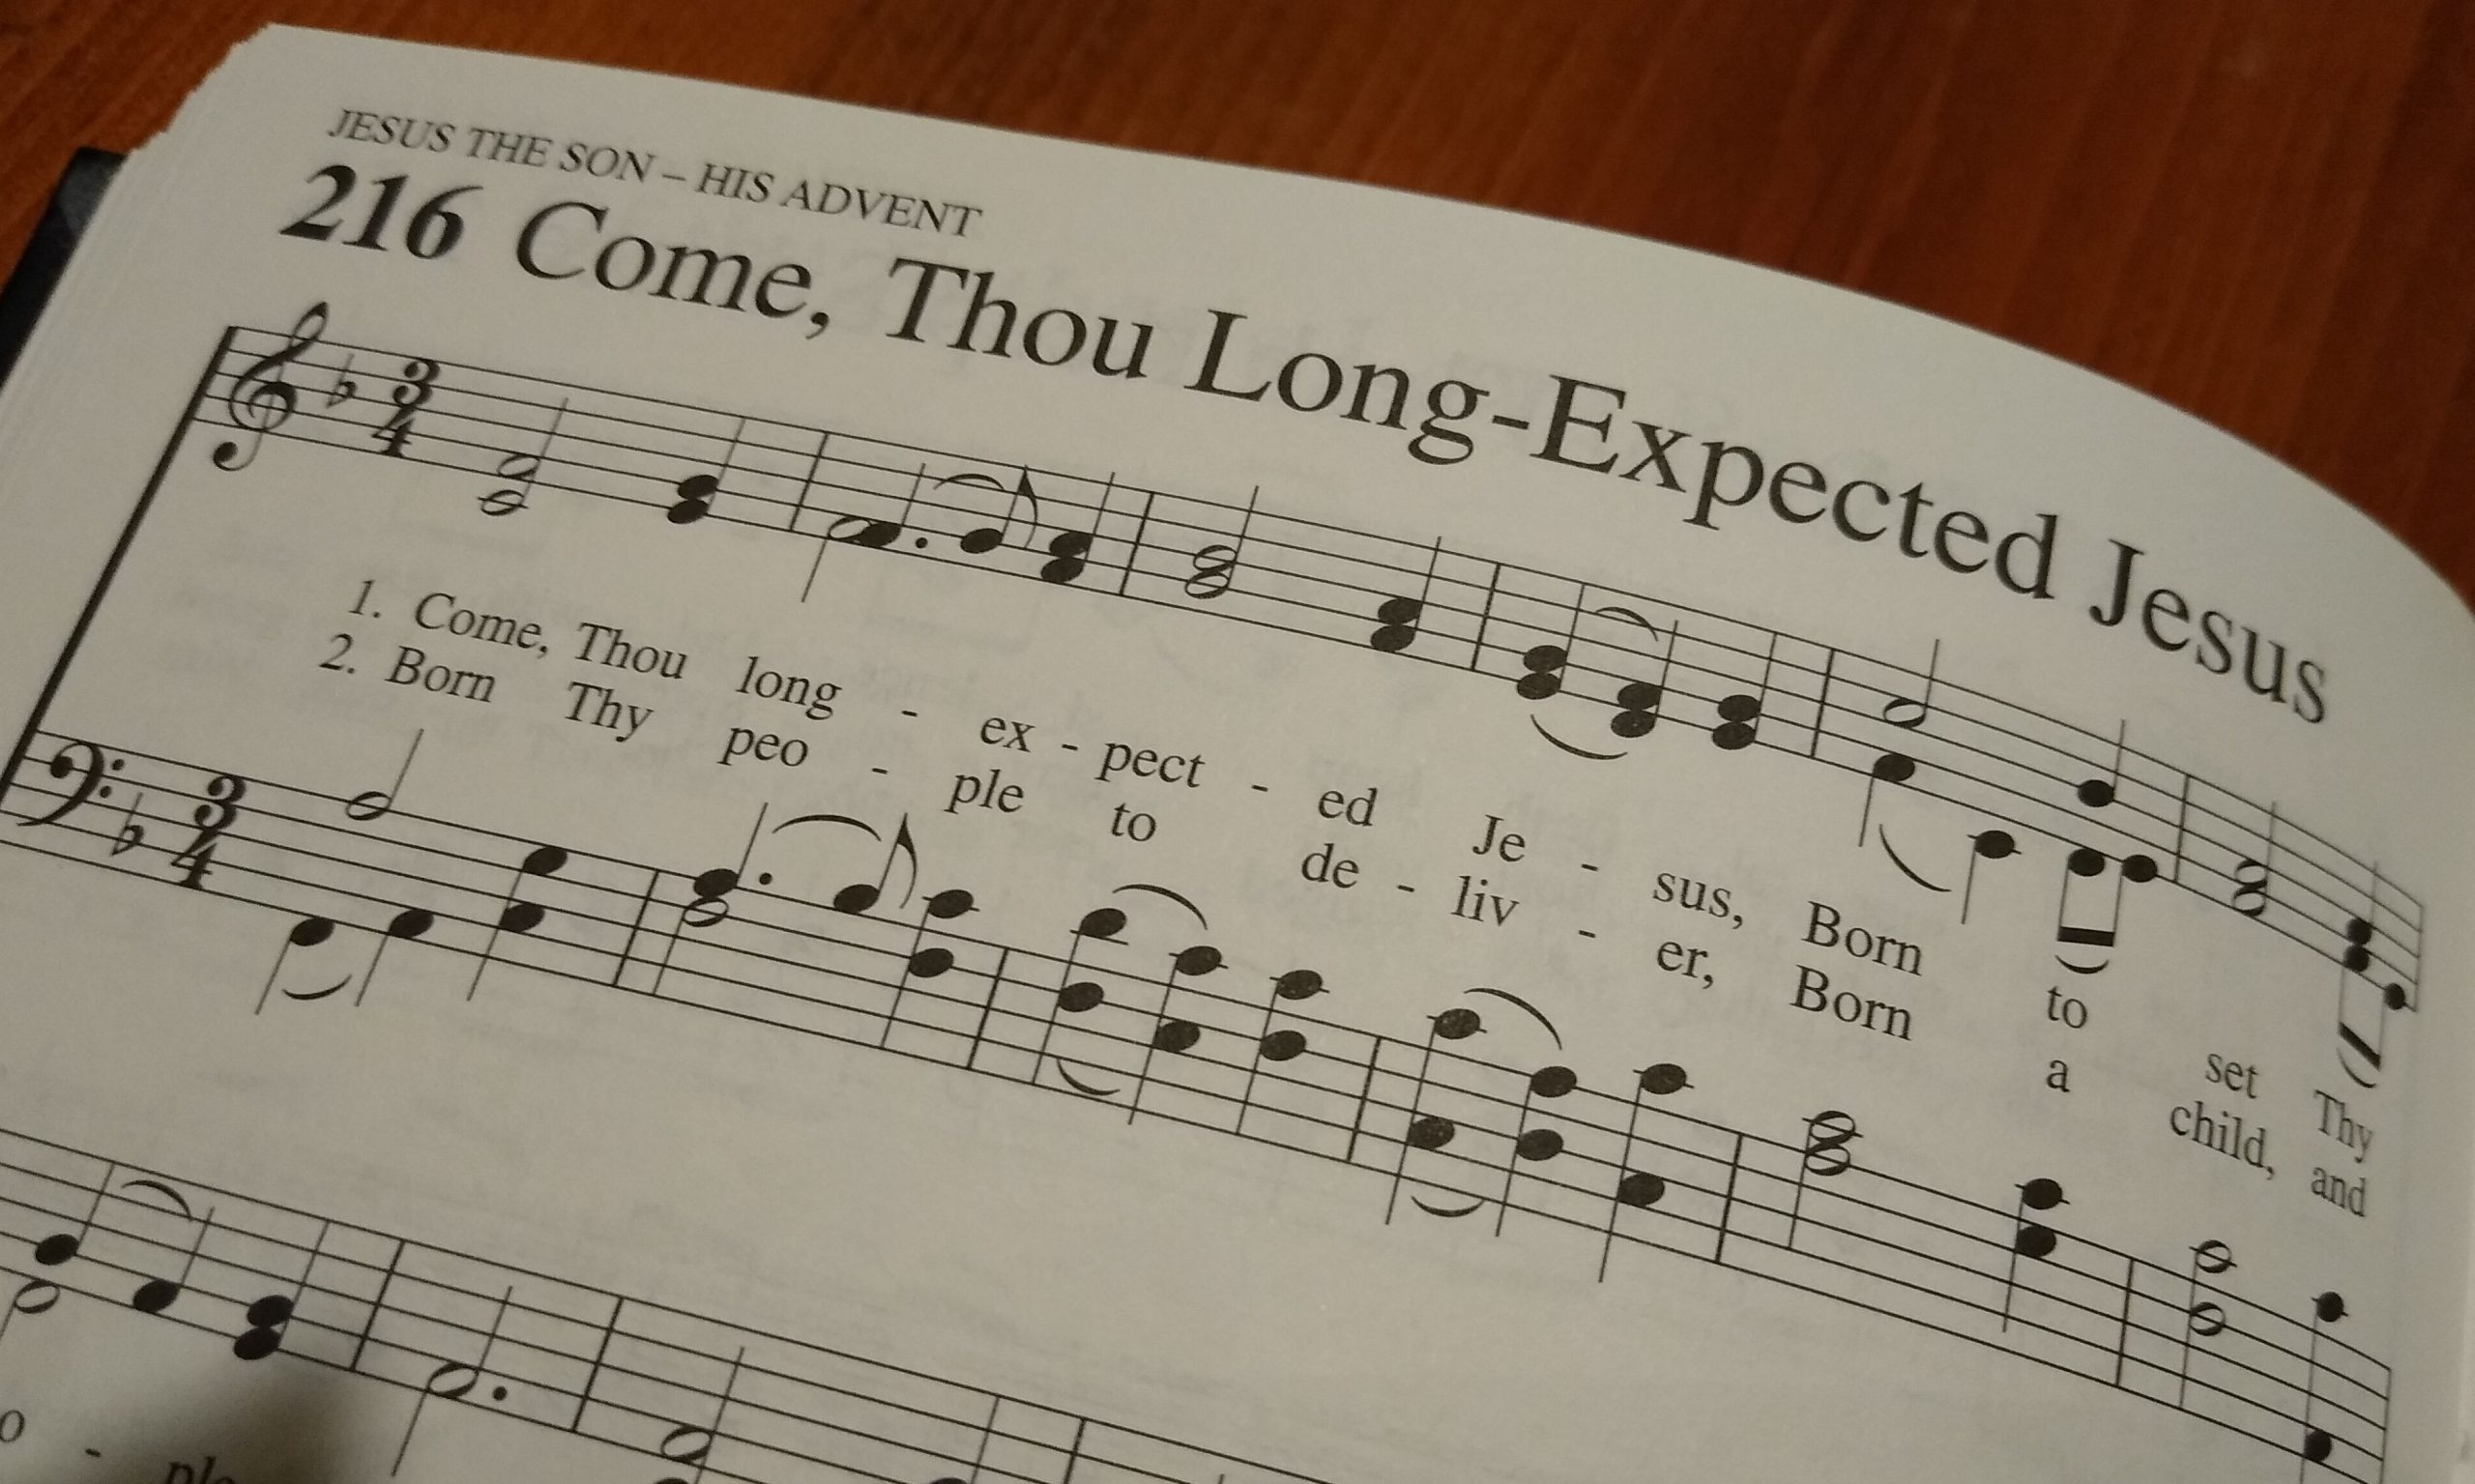 Christmas Carol Messages: Come Thou Long-Expected Jesus